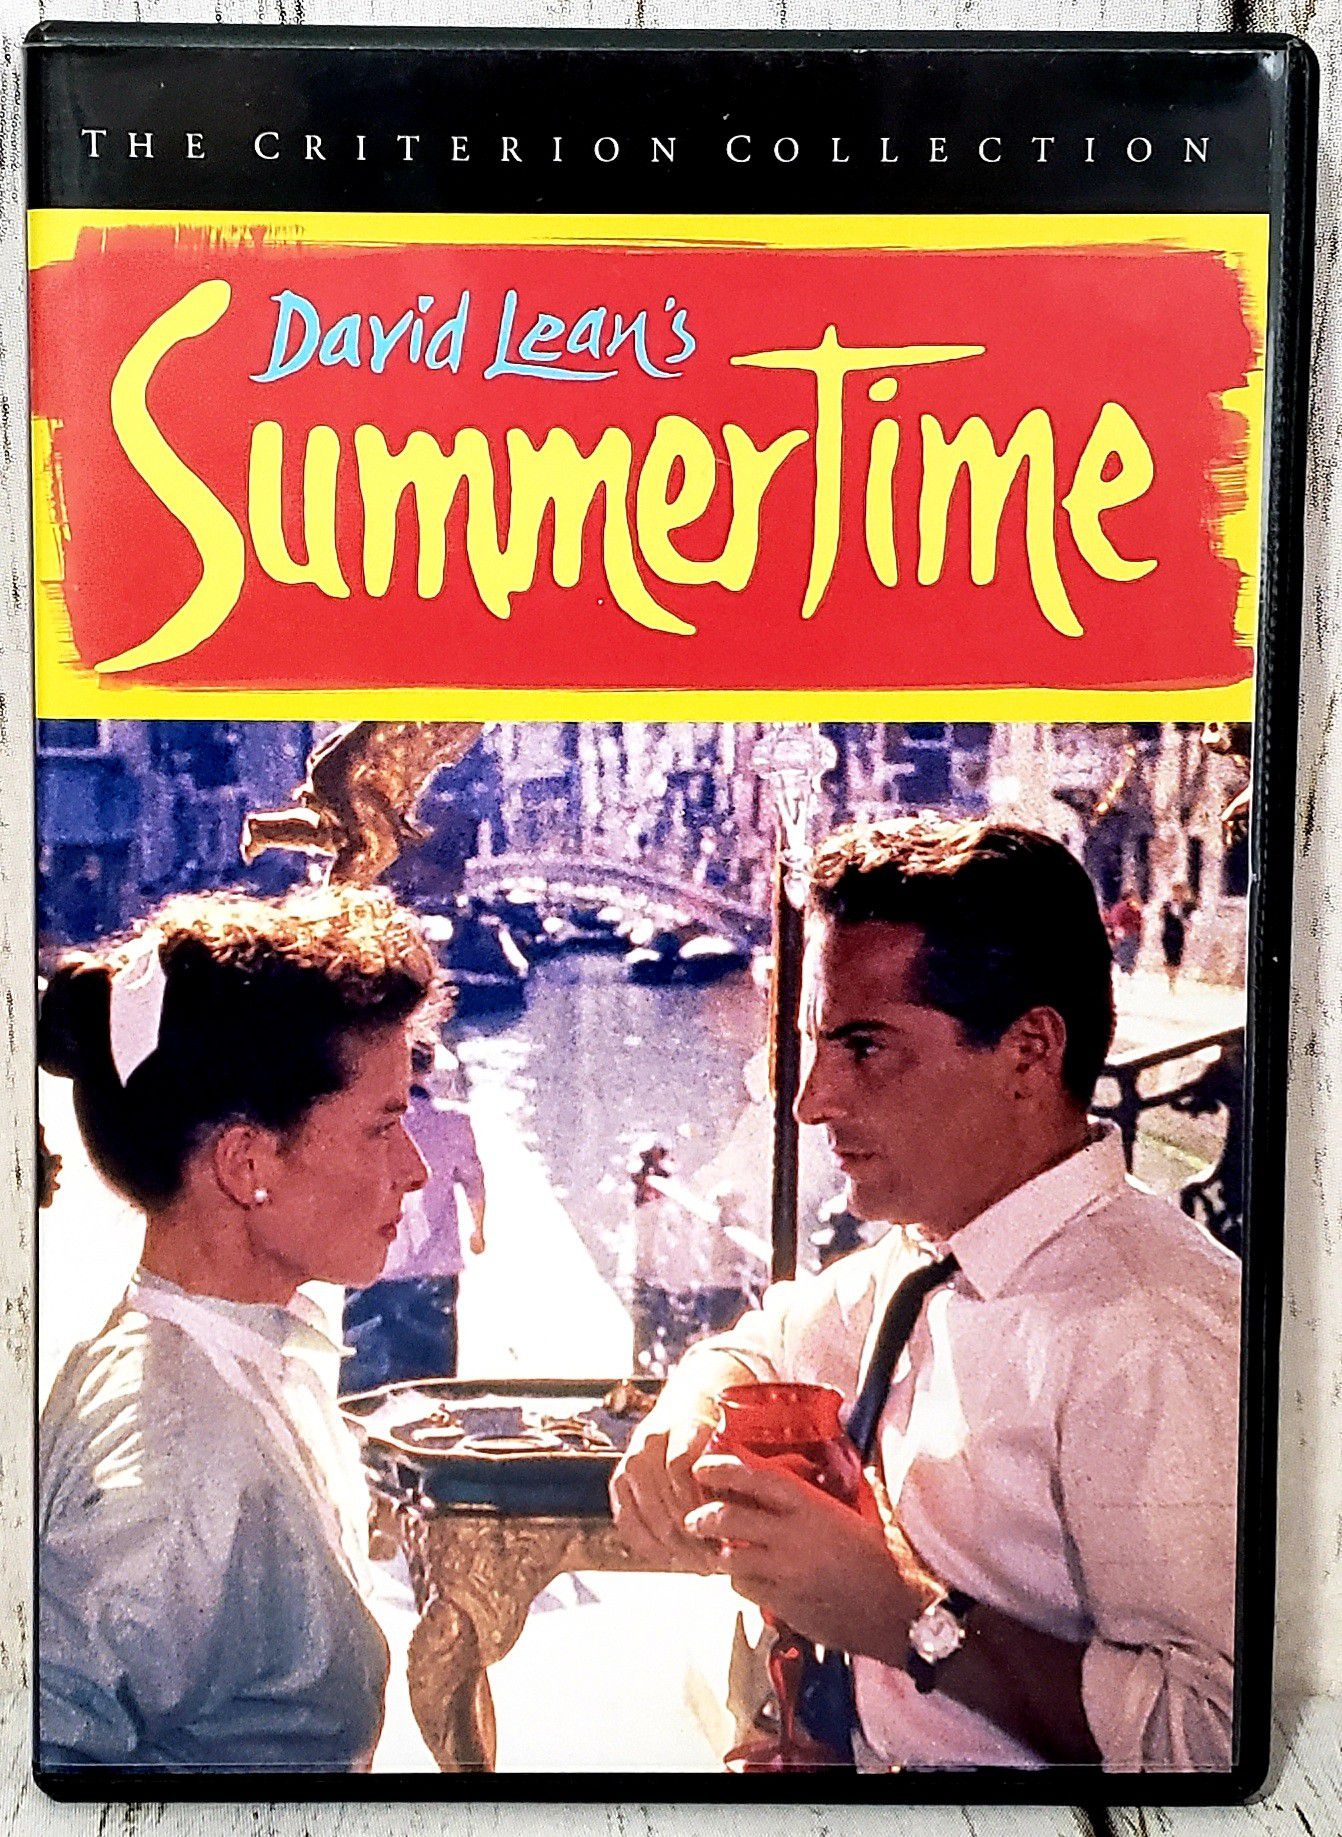 Summertime (DVD, 1998, Criterion Collection) - NEW OPEN NEVER USED - MINT